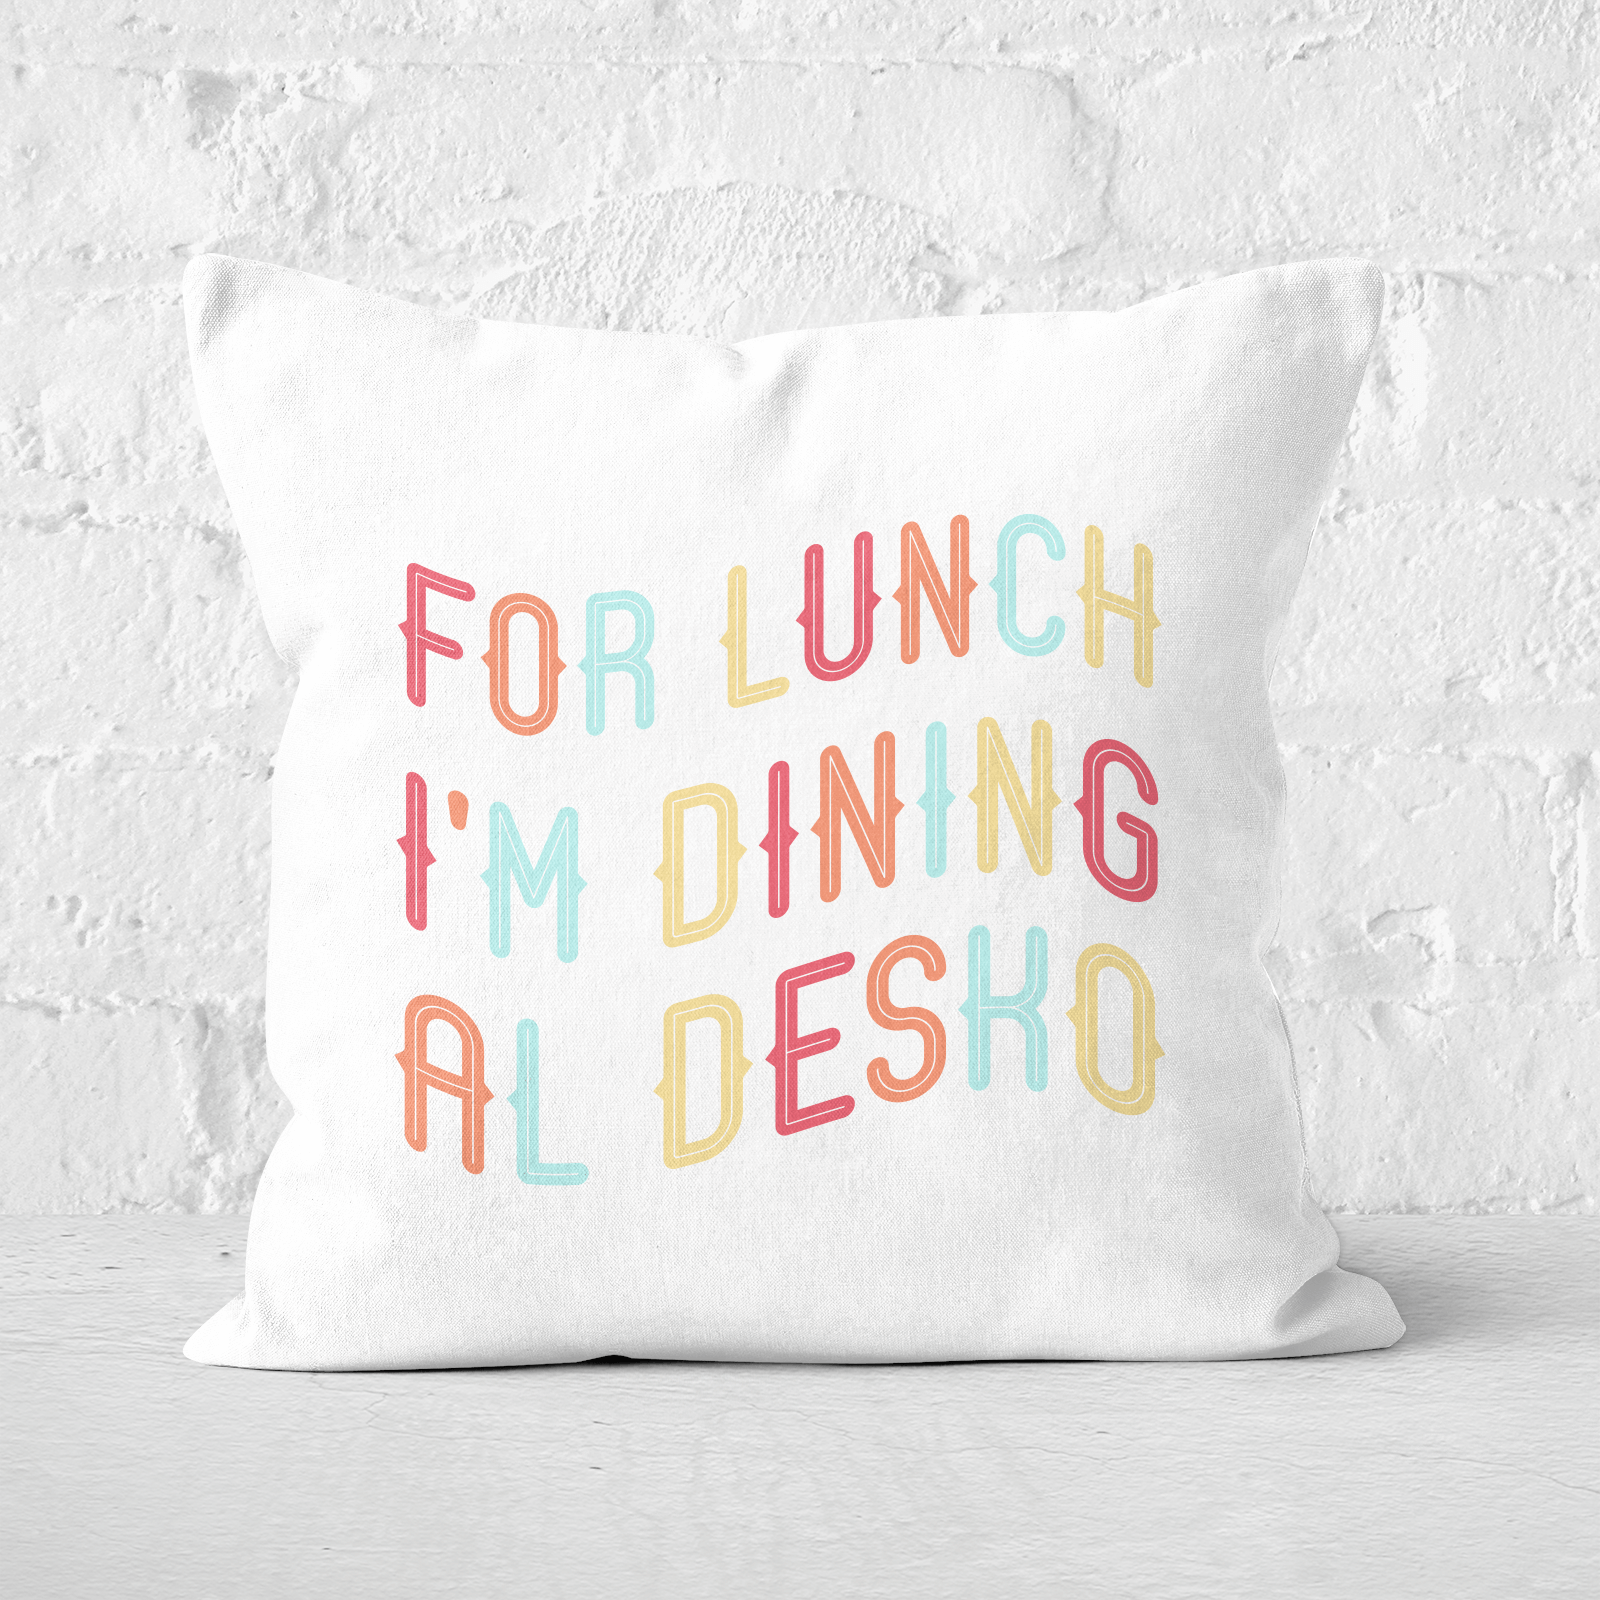 For Lunch I'm Dining Al Desko Square Cushion - 60x60cm - Soft Touch